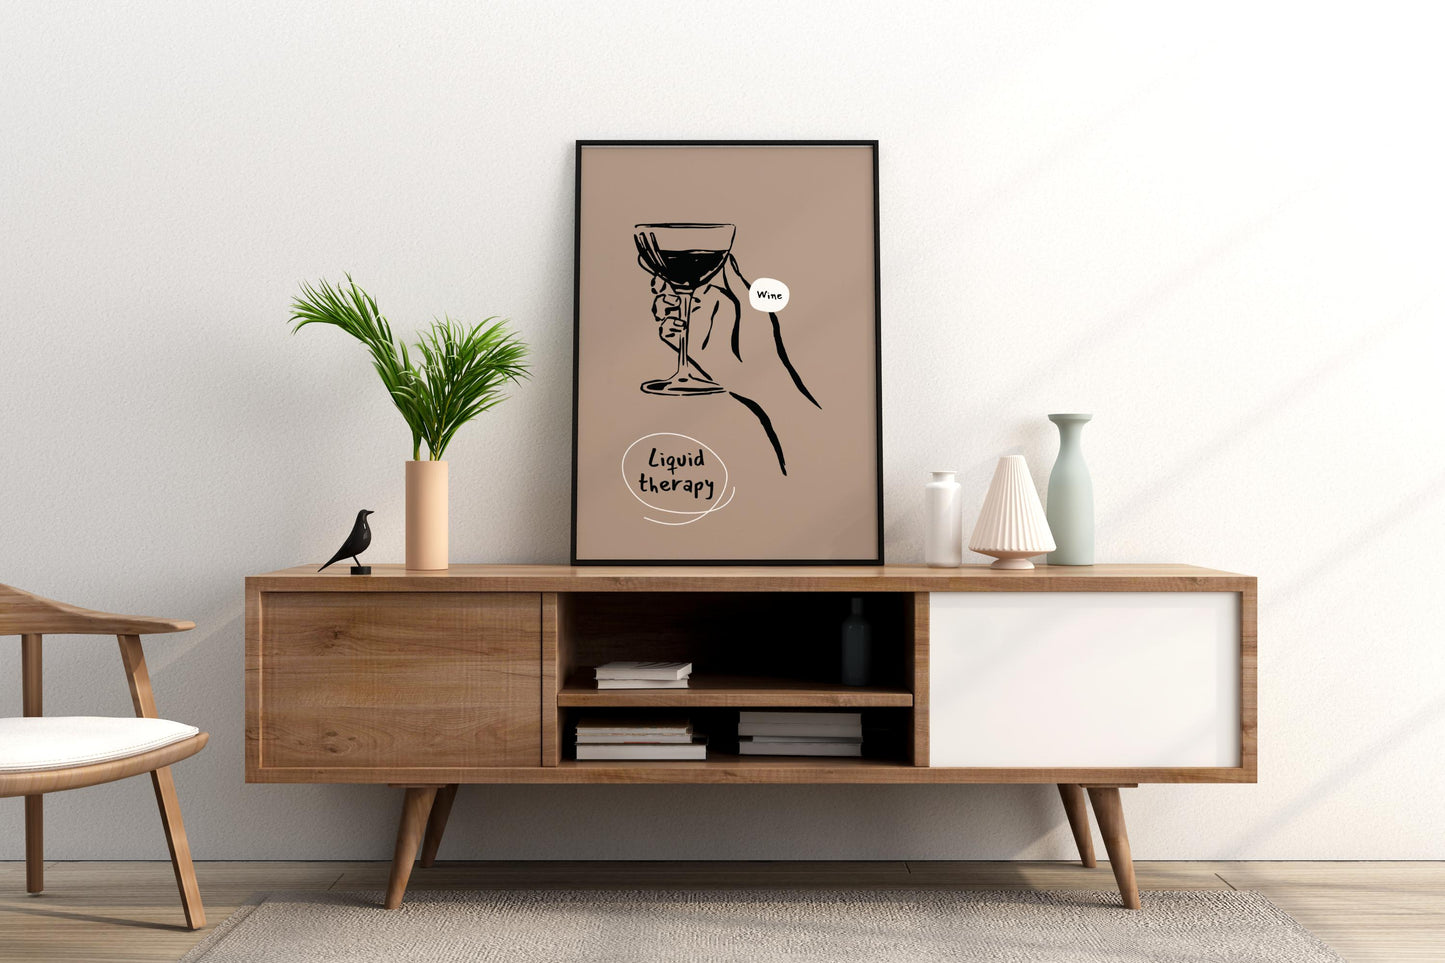 Liquid Therapy - Wine Illustrated Food Print Poster - Pitchers Design